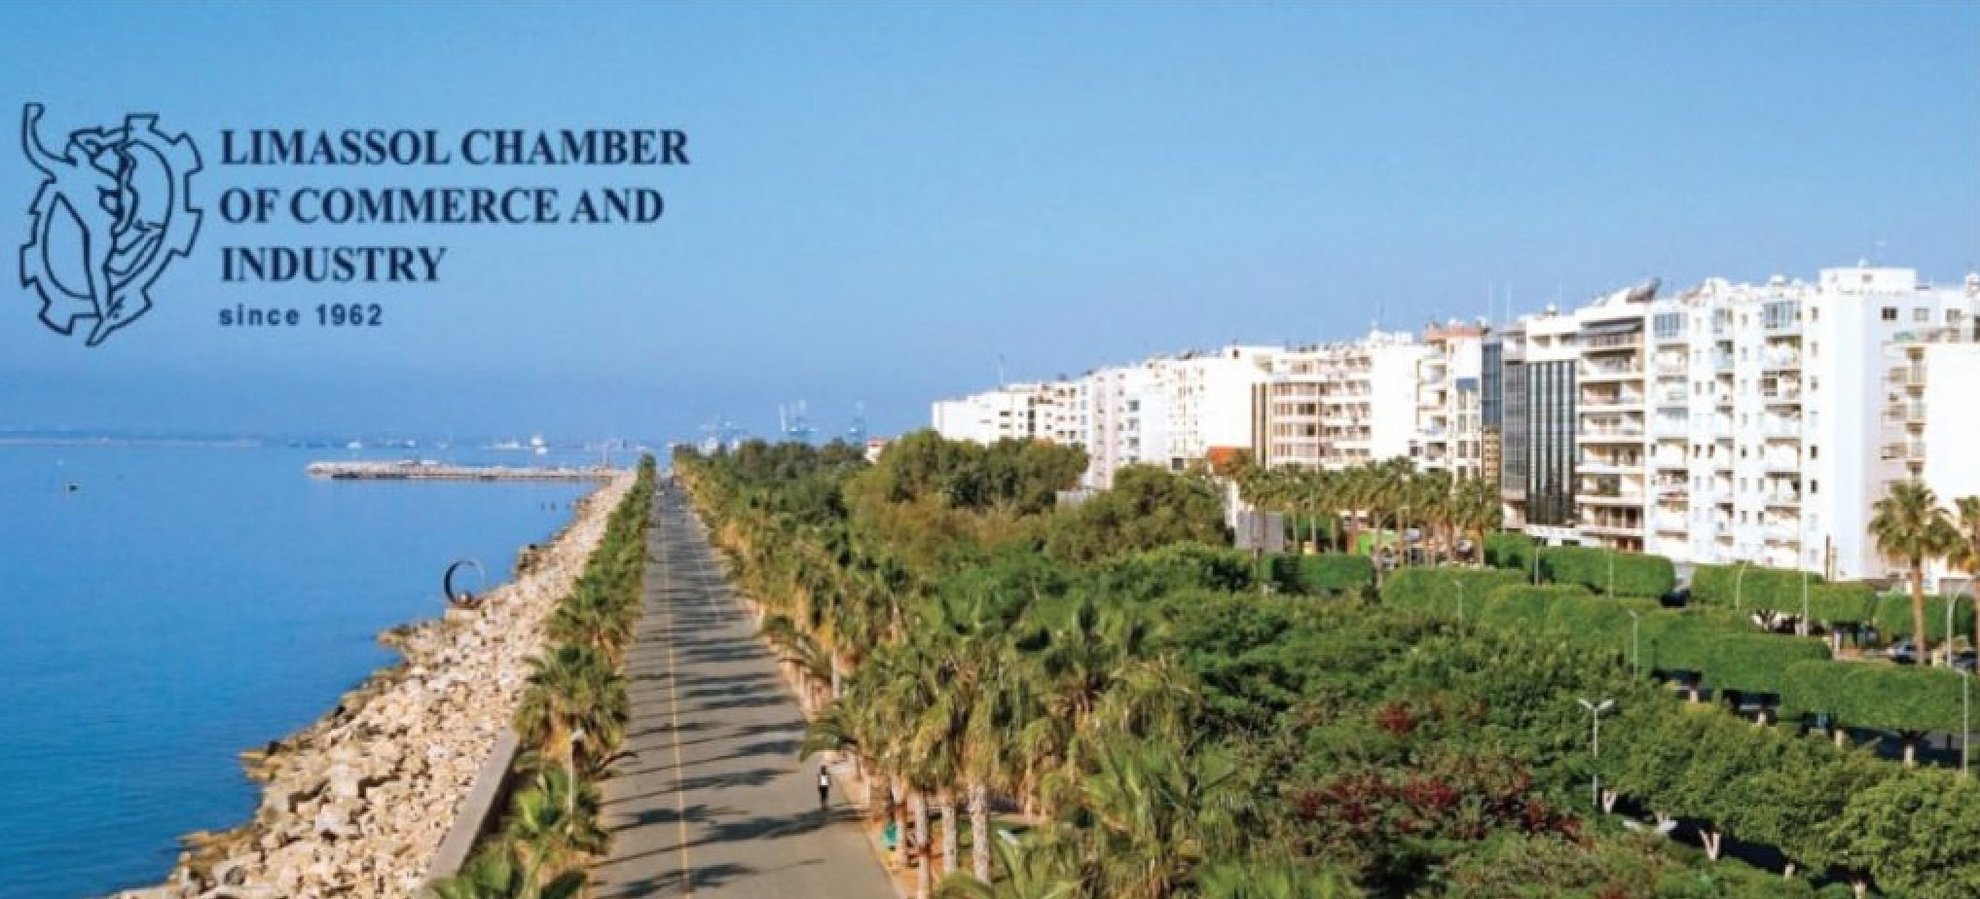 image Limassol business “not as gloomy” as last year, report shows